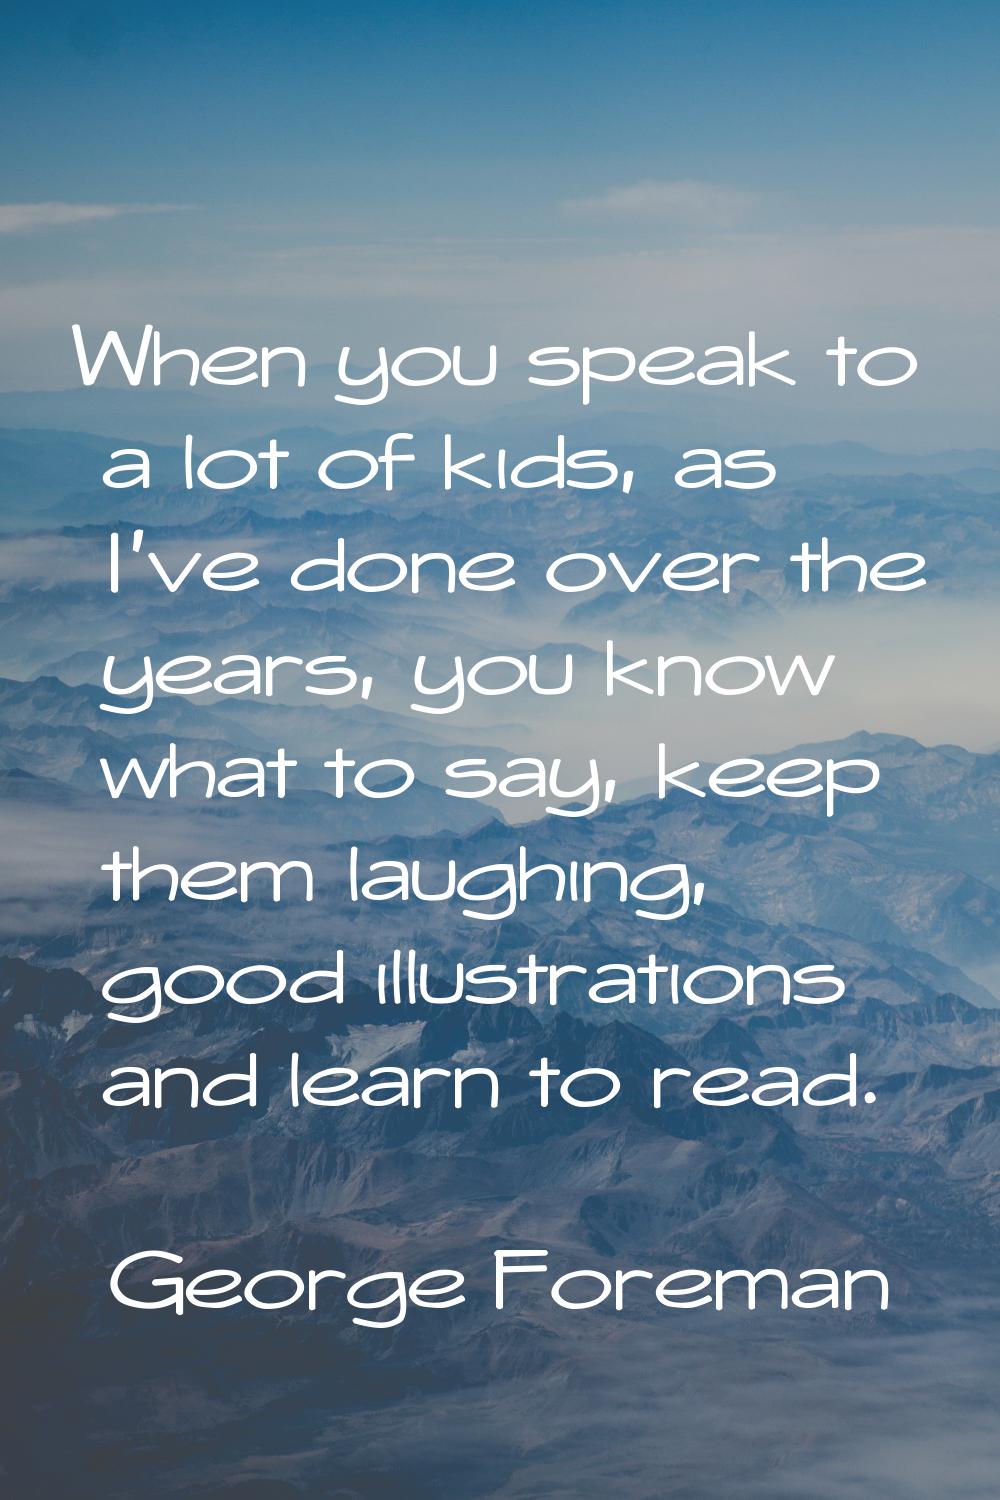 When you speak to a lot of kids, as I've done over the years, you know what to say, keep them laugh